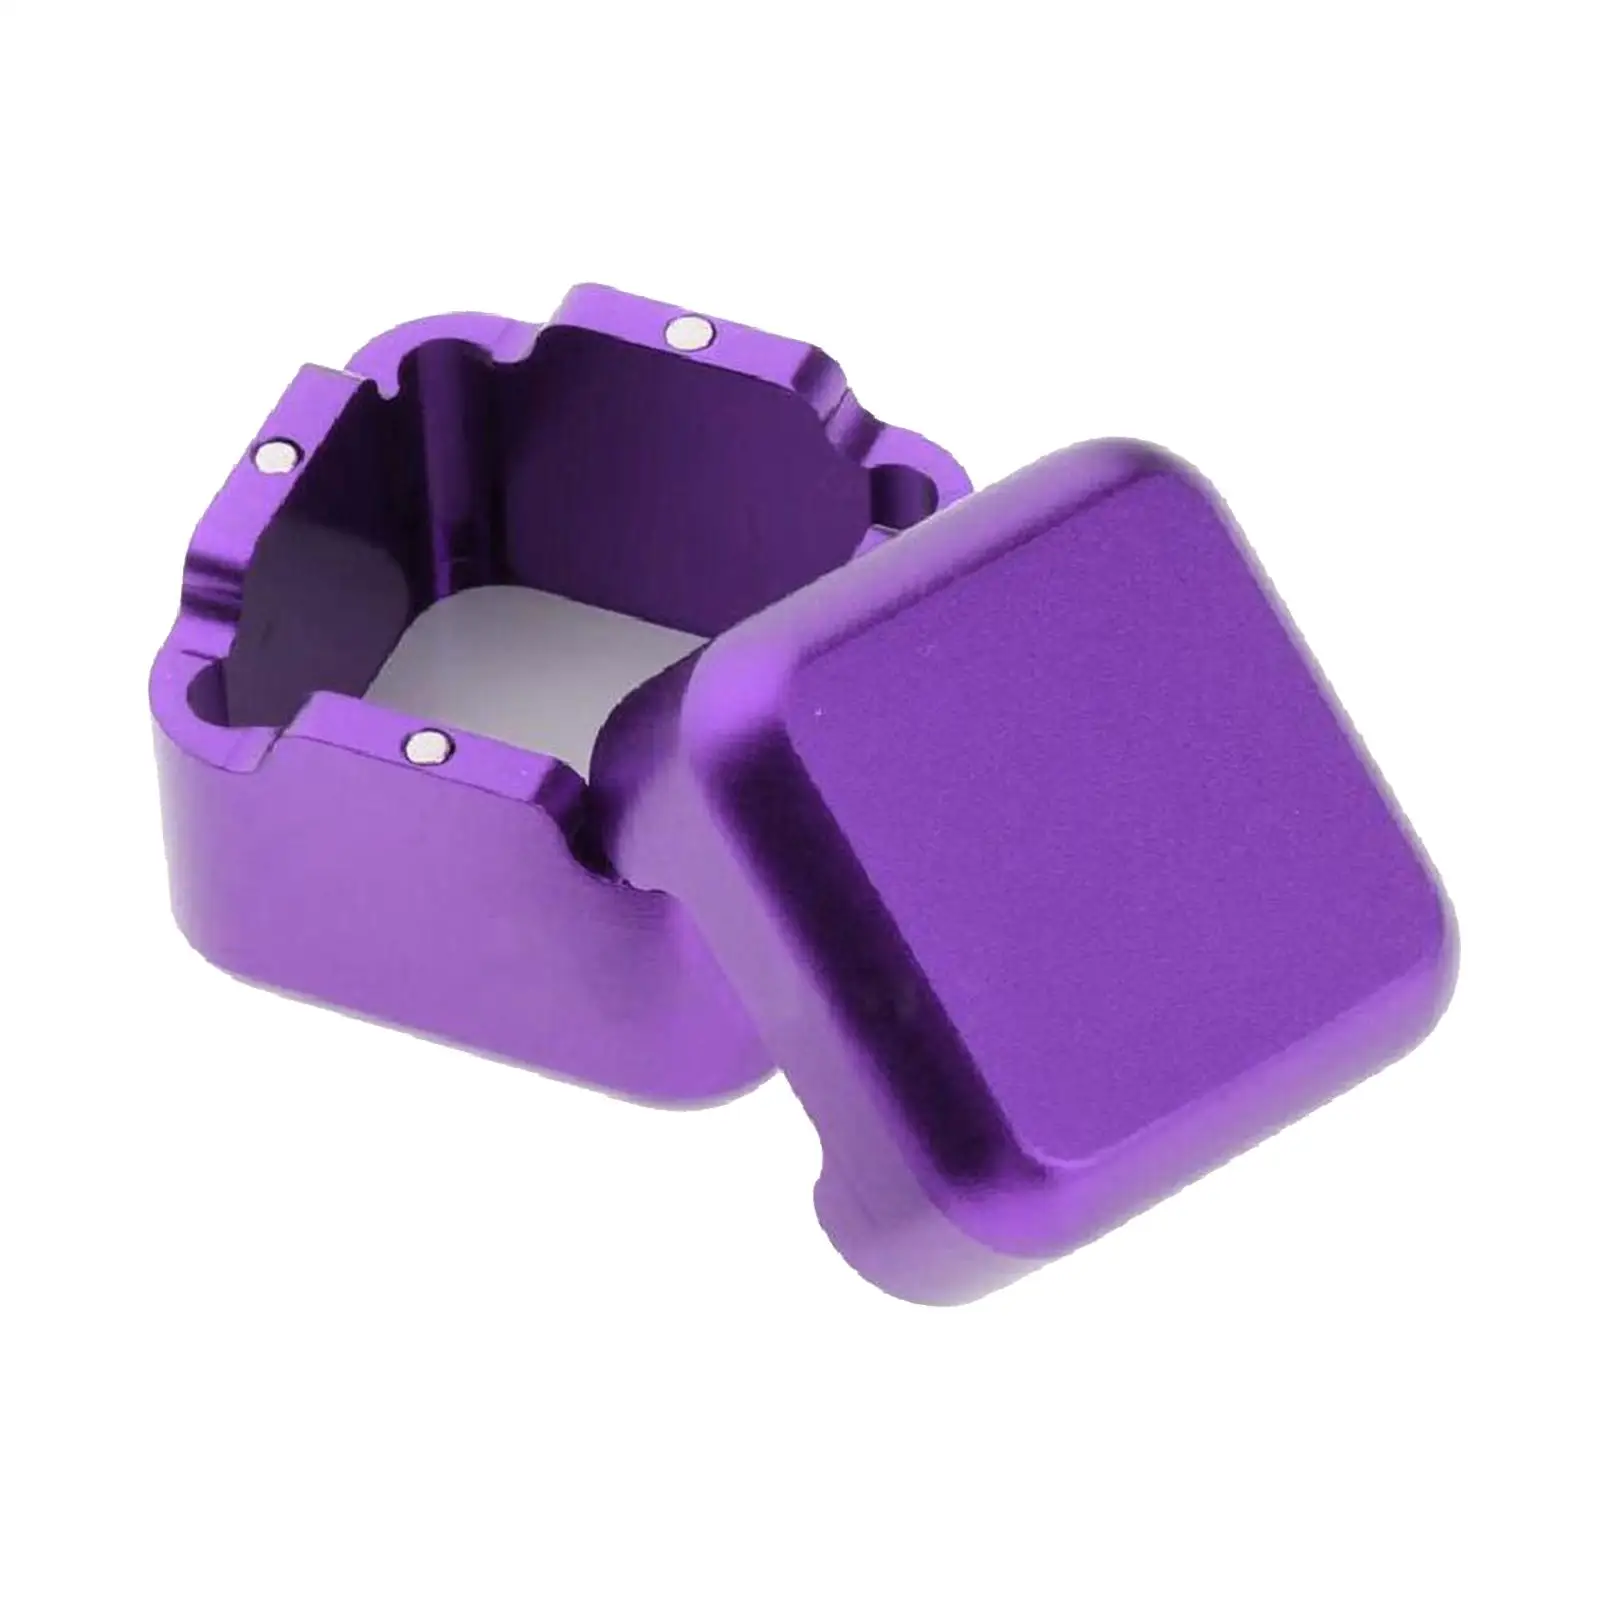 Billiard Pool Chalk Cup Holders Square for Pocket Chalkers Billiards Players Violet